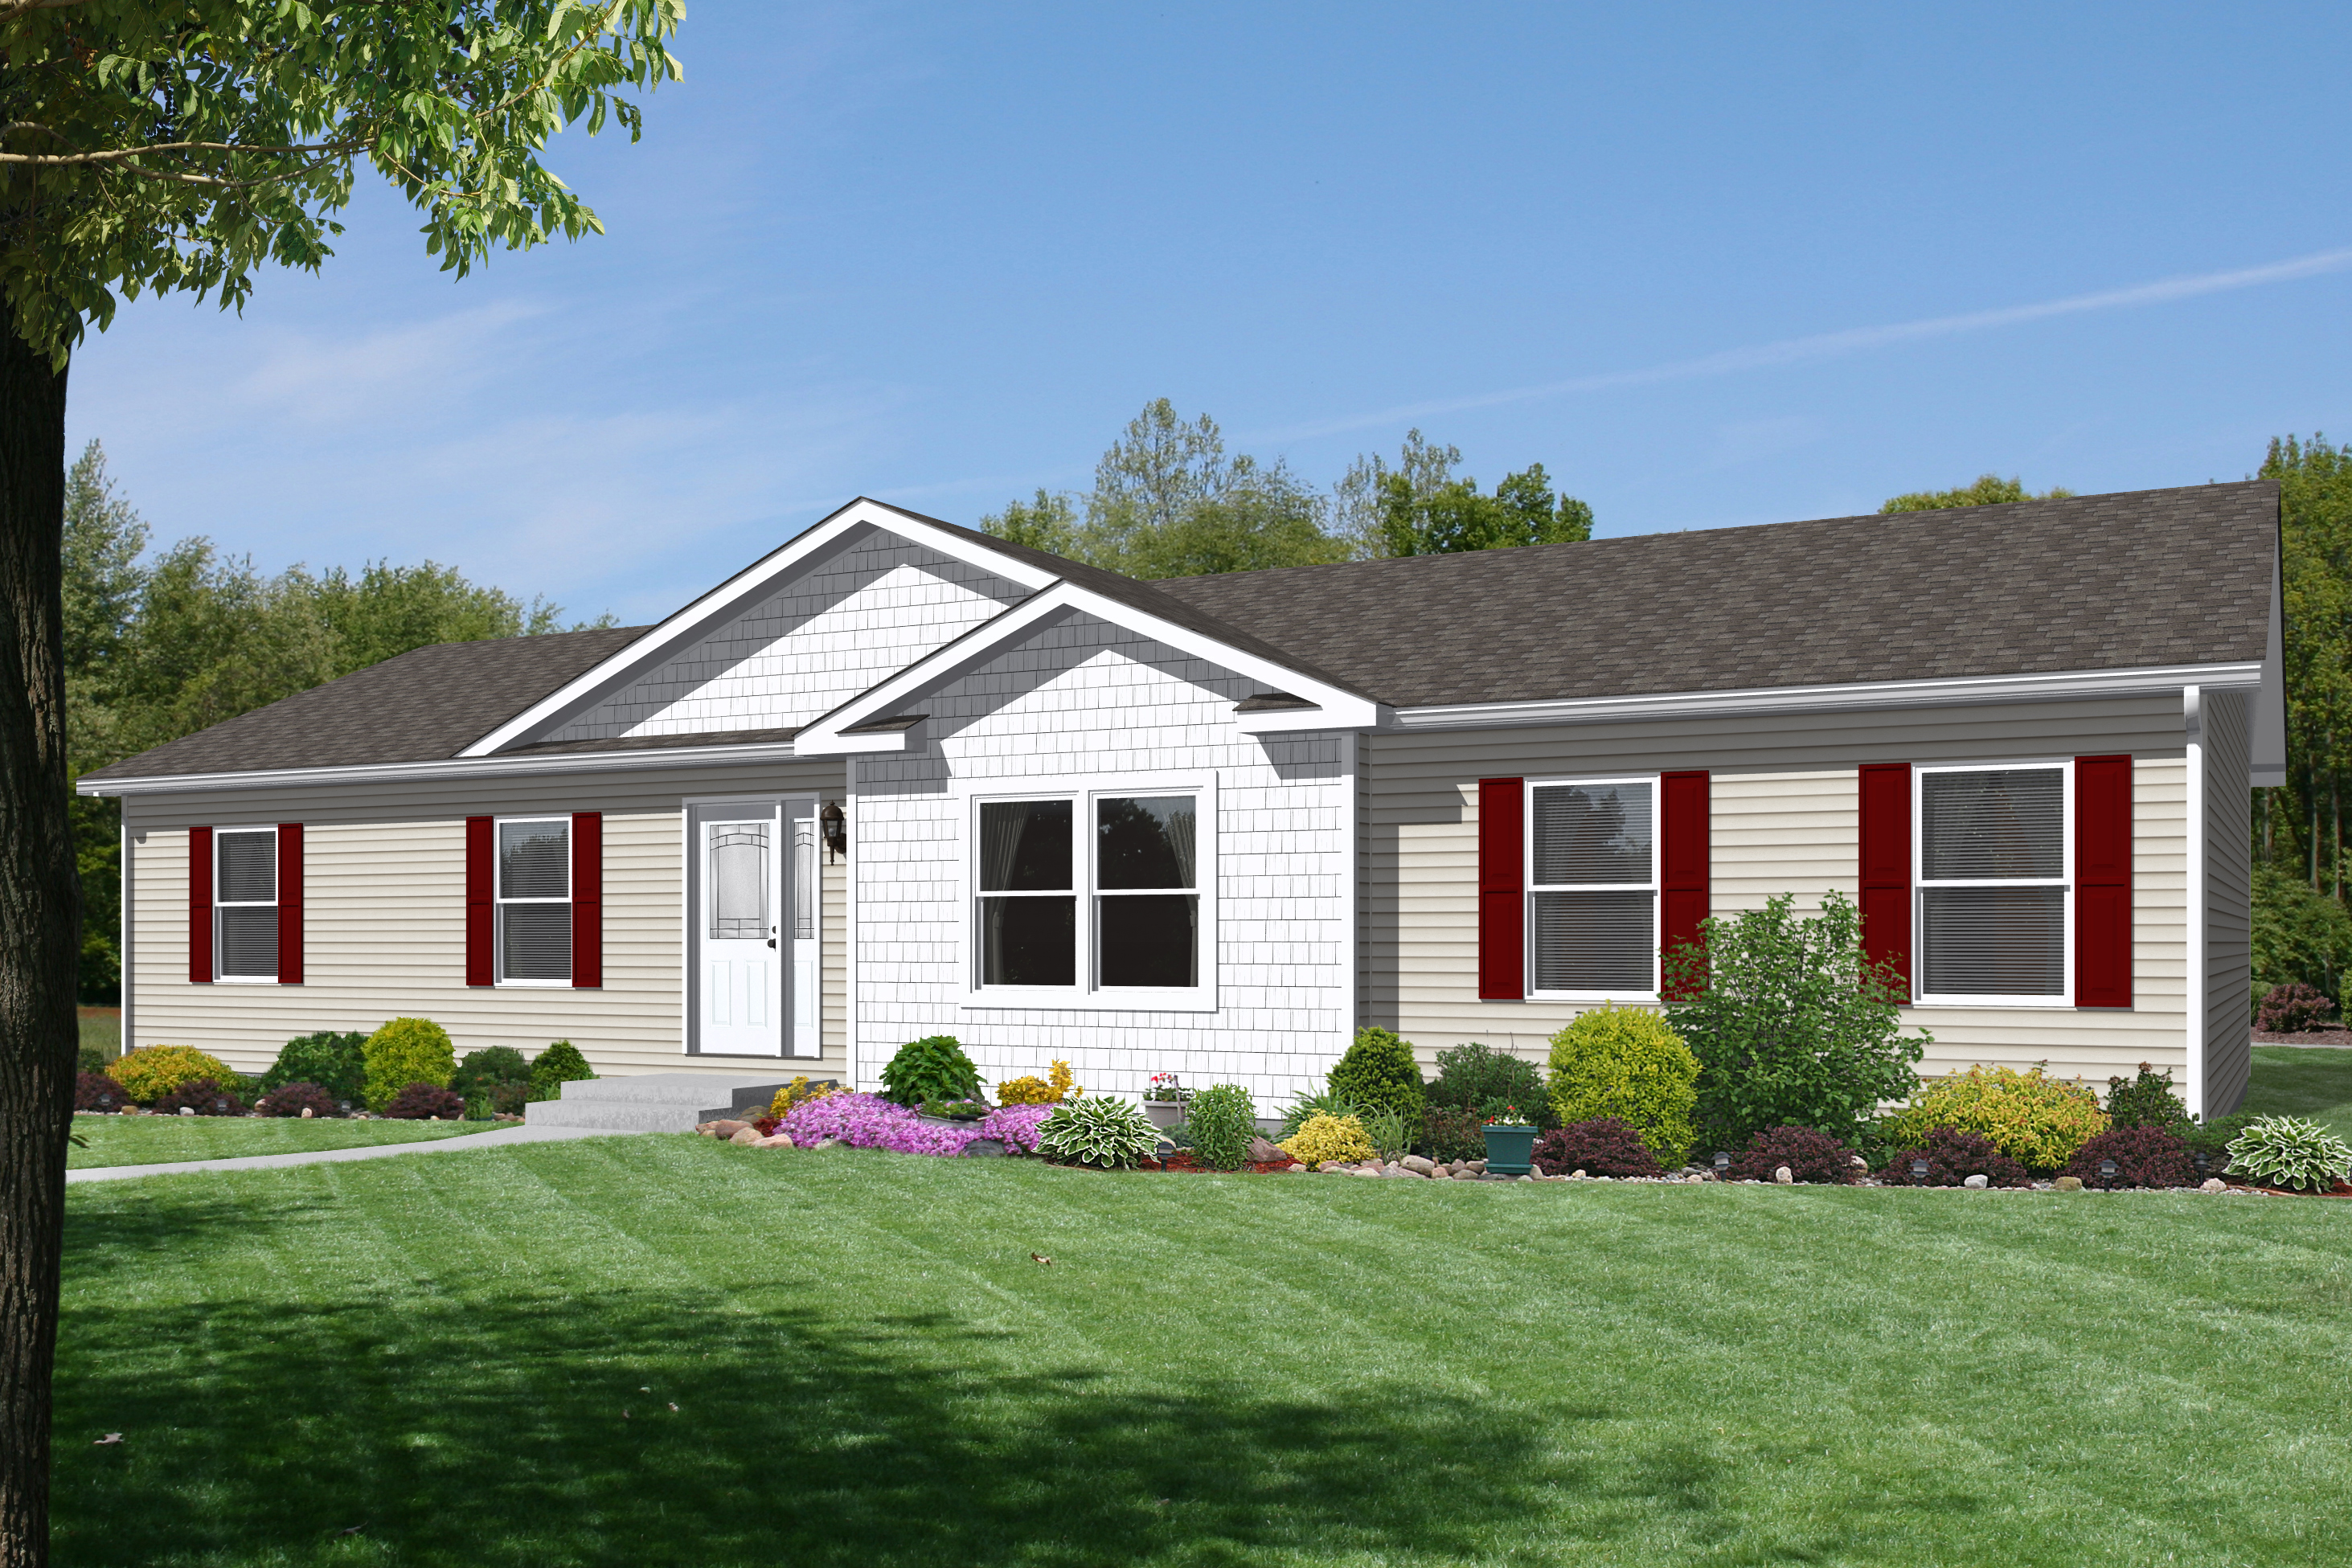 Michigan Manufactured Housing Association, Tuesday, April 23, 2019, Press release picture